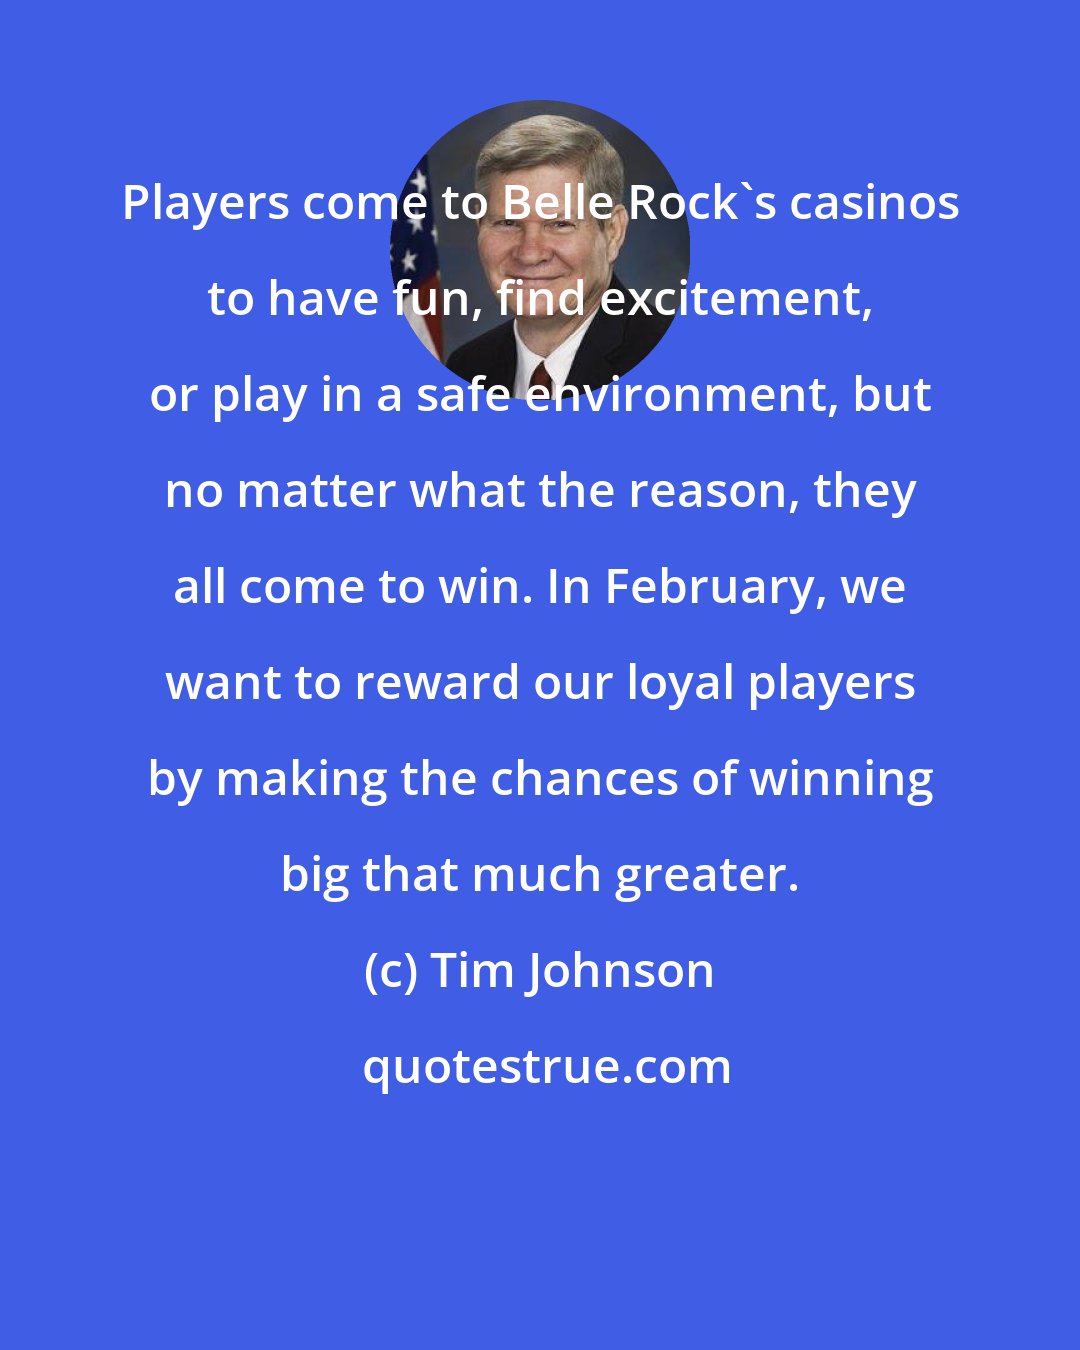 Tim Johnson: Players come to Belle Rock's casinos to have fun, find excitement, or play in a safe environment, but no matter what the reason, they all come to win. In February, we want to reward our loyal players by making the chances of winning big that much greater.